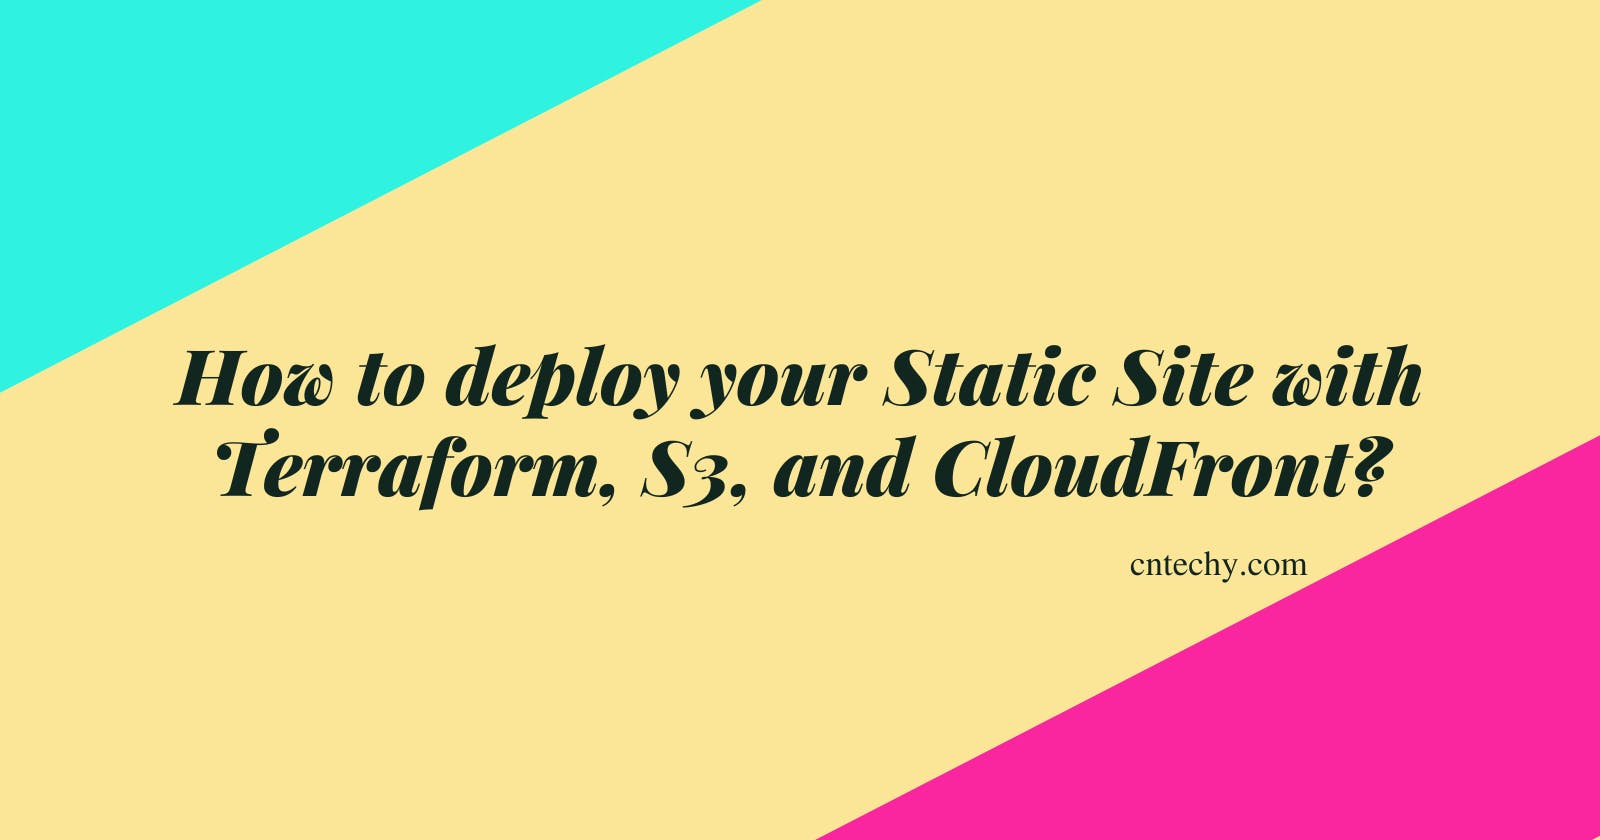 How to deploy your Static Site with Terraform, S3, and CloudFront?